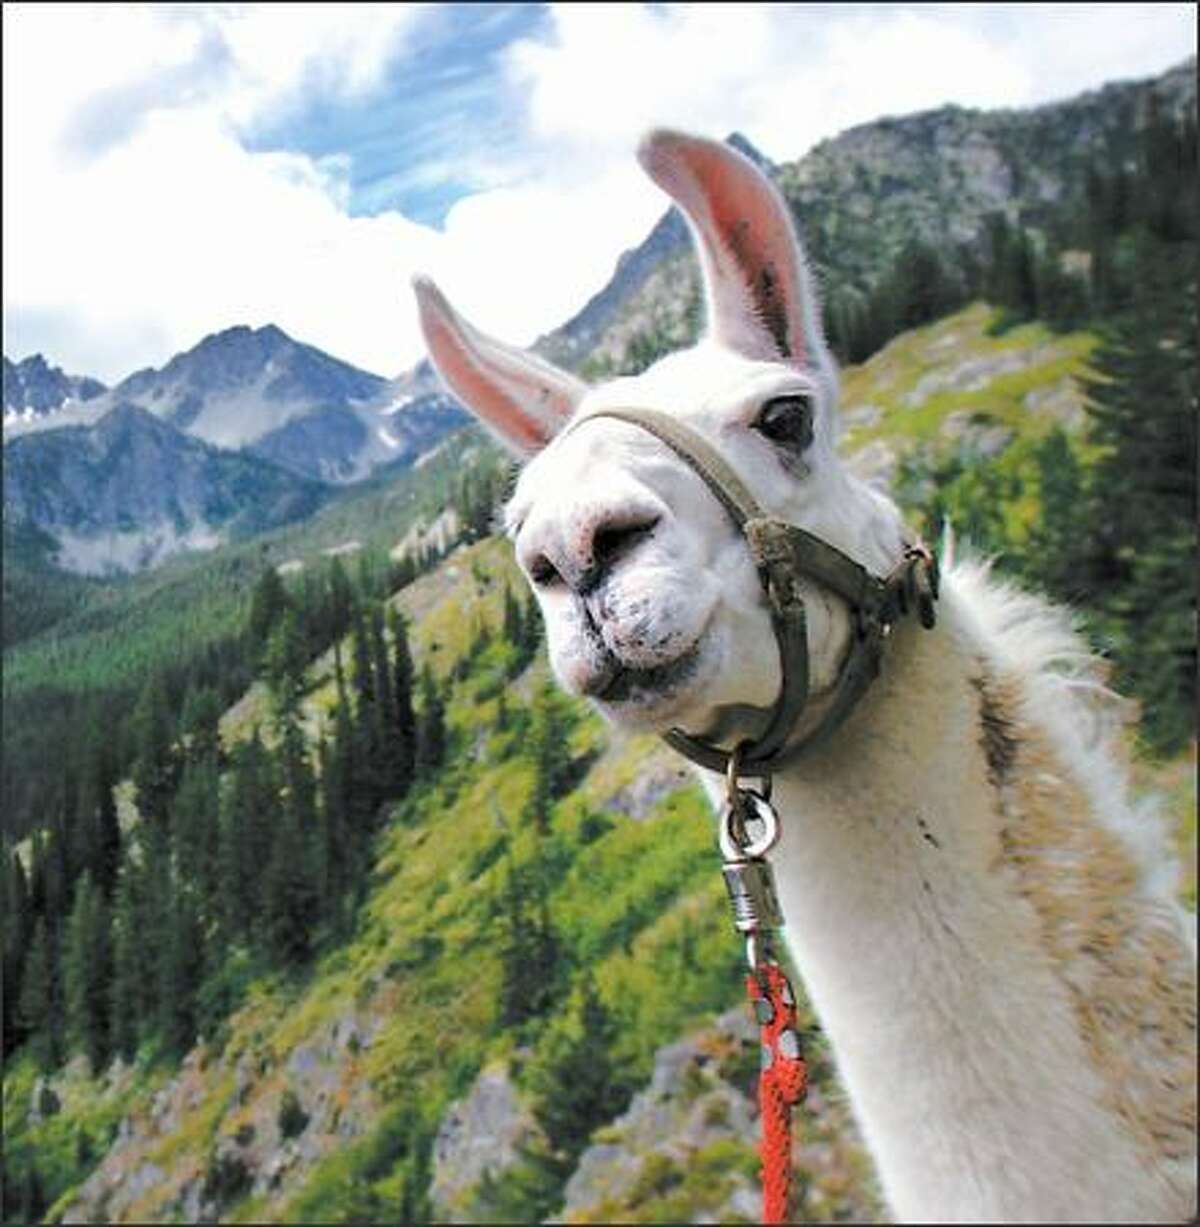 A curious llama eyes the photographer during a hike along the Twisp River Trail in the Okanogan National Forest.